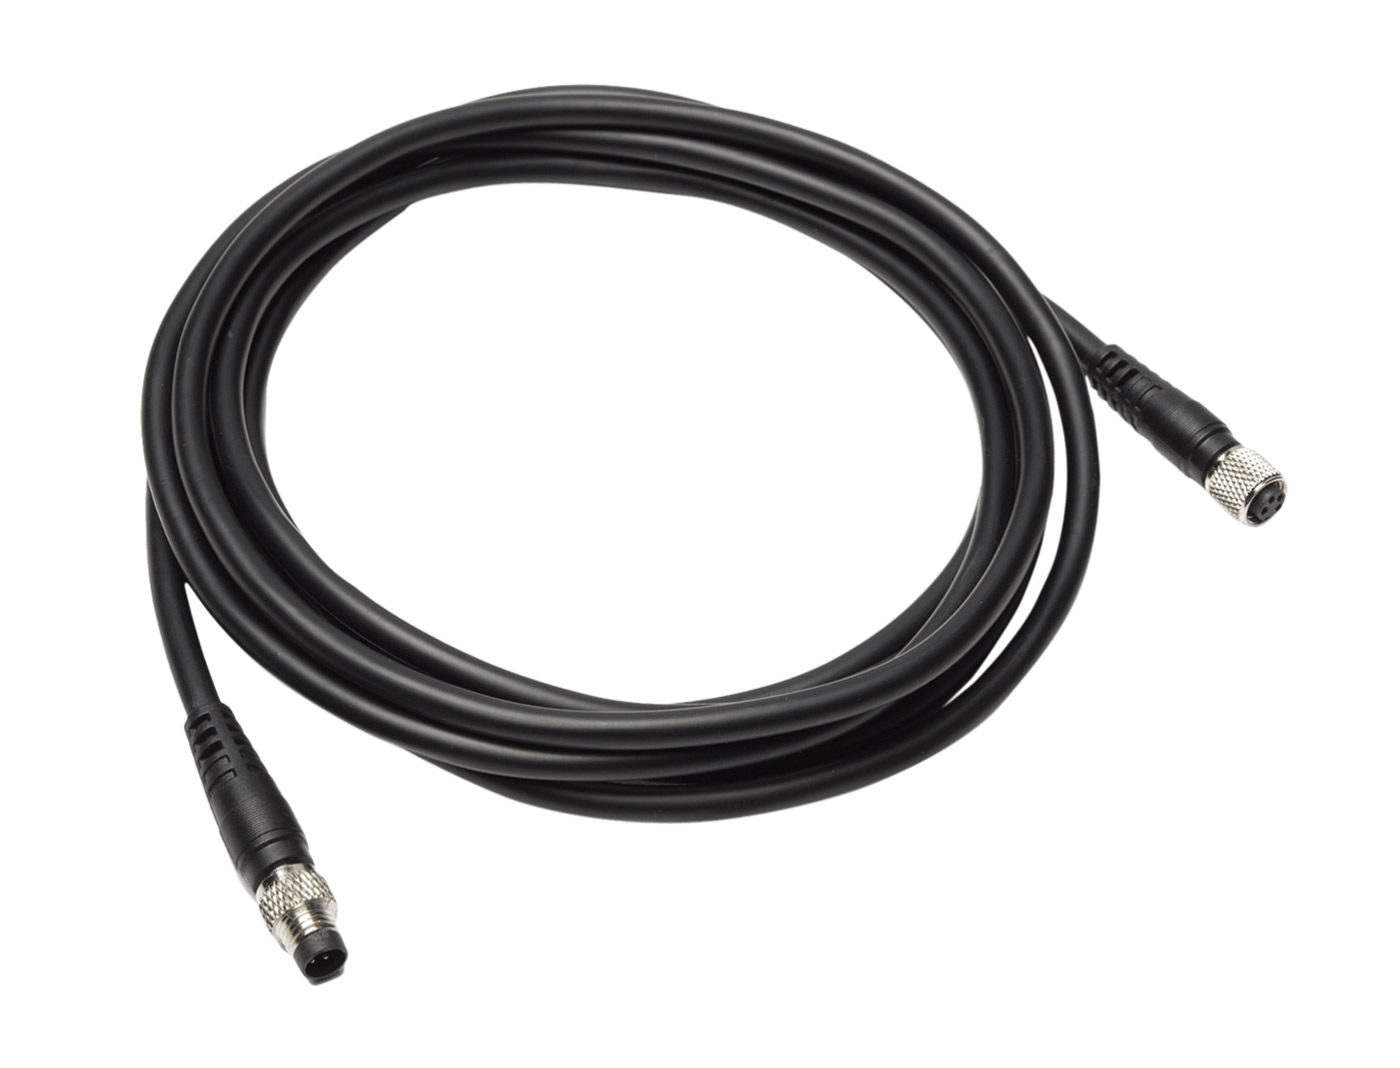 Mkr Us2 11 Universal Sonar 2 Extension Cable